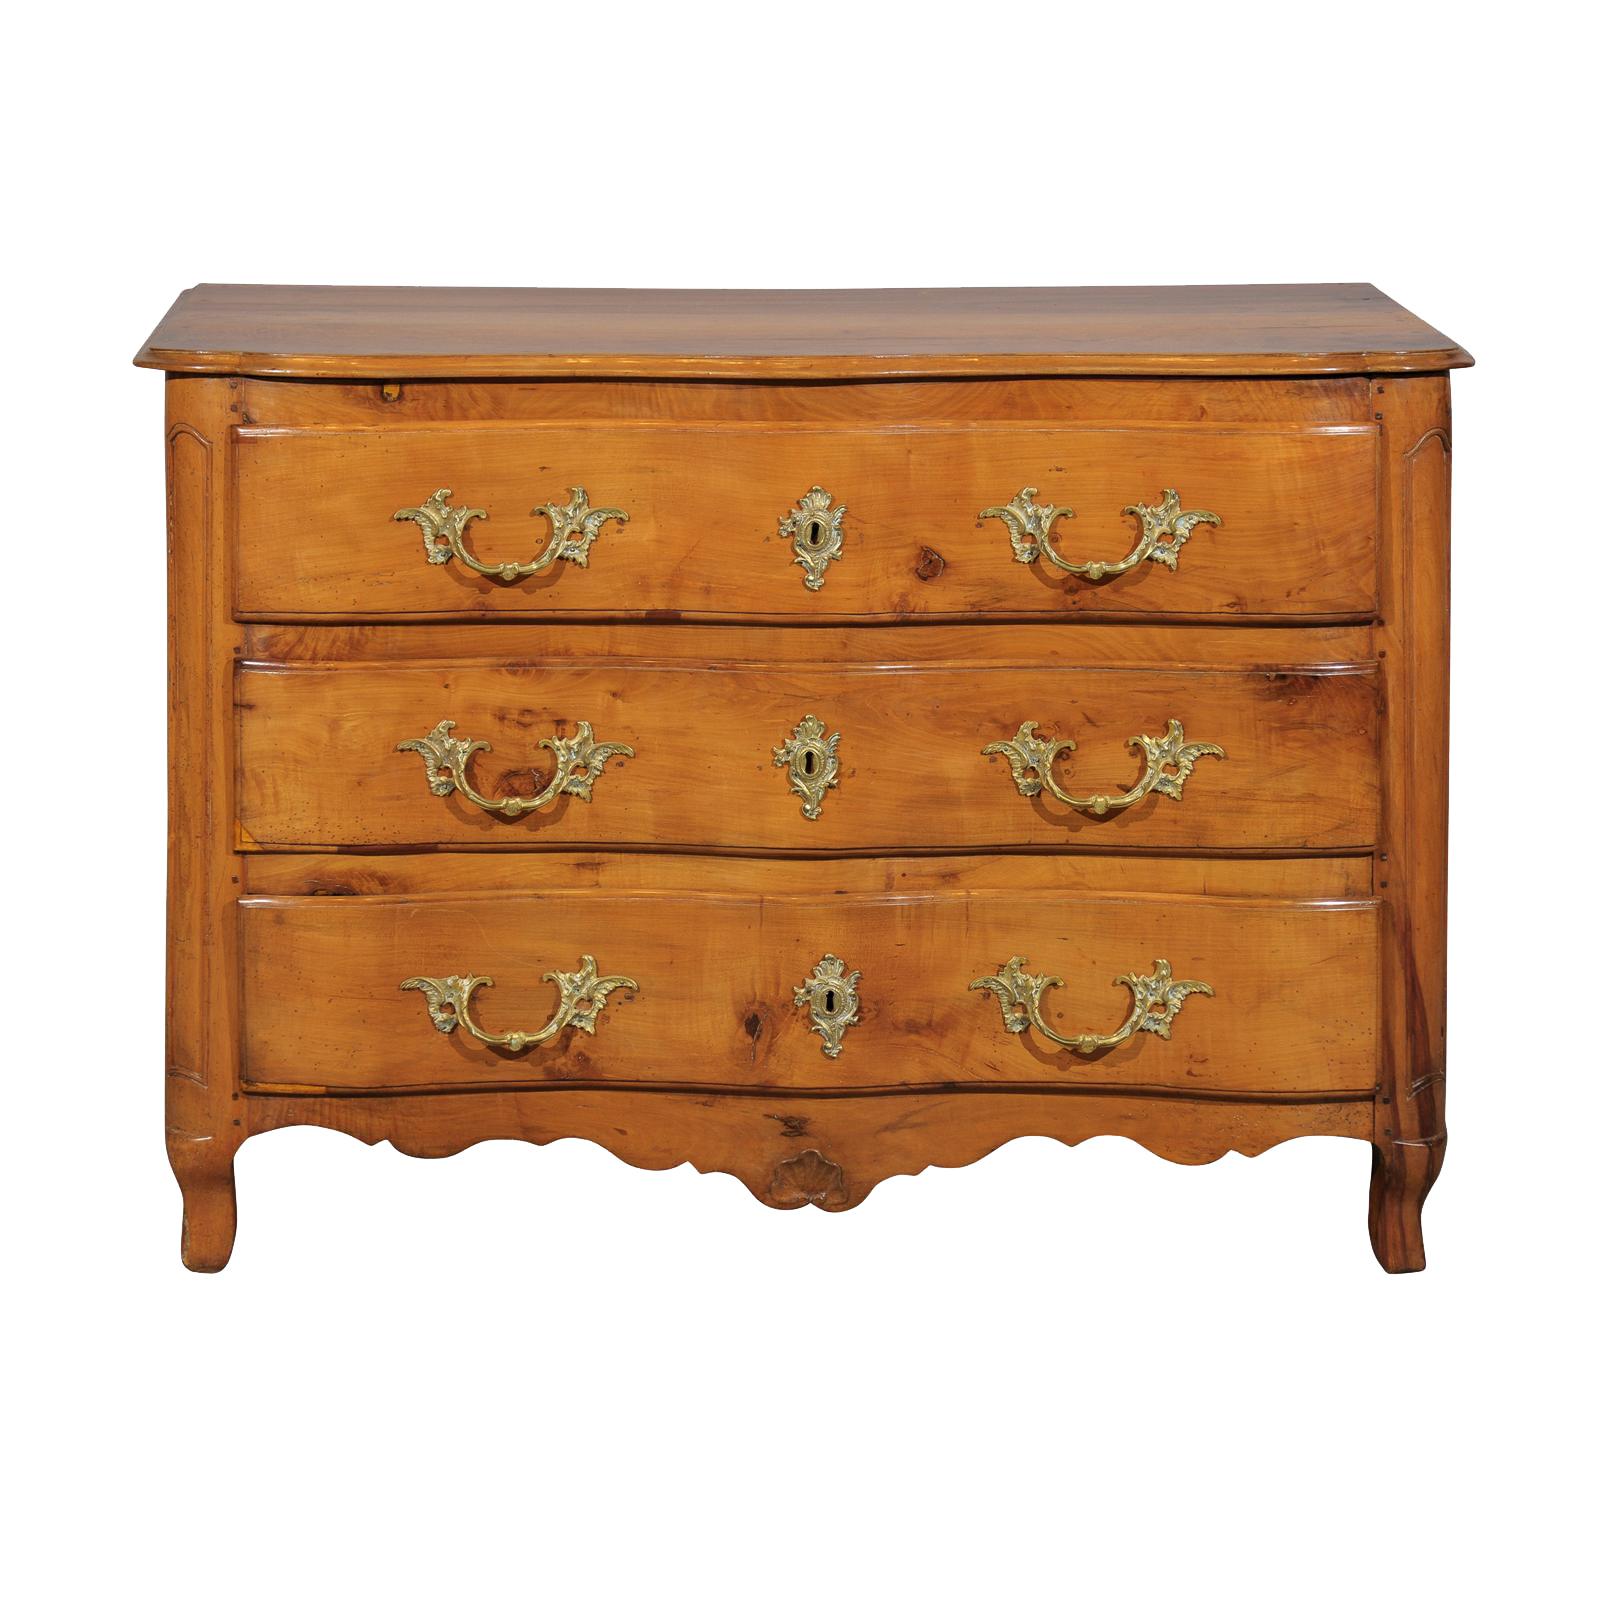 Early 19th Century French Fruitwood Serpentine Front Commode with 3 Drawers For Sale